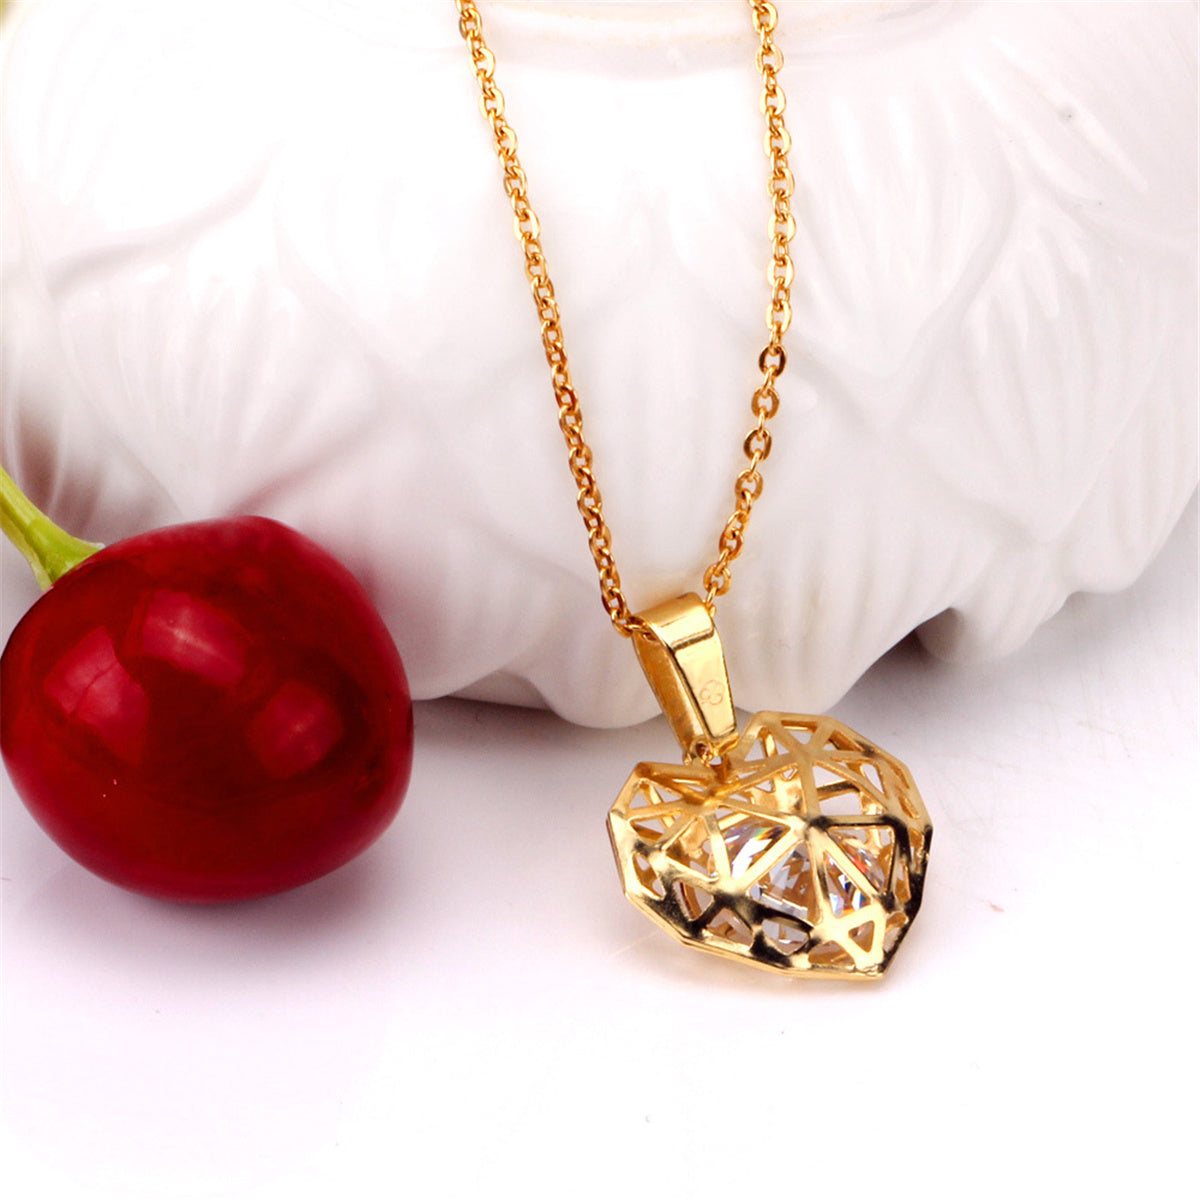 Clear Cubic Zirconia & 18K Gold-Plated Heart Drop Earrings & Pendant Necklace